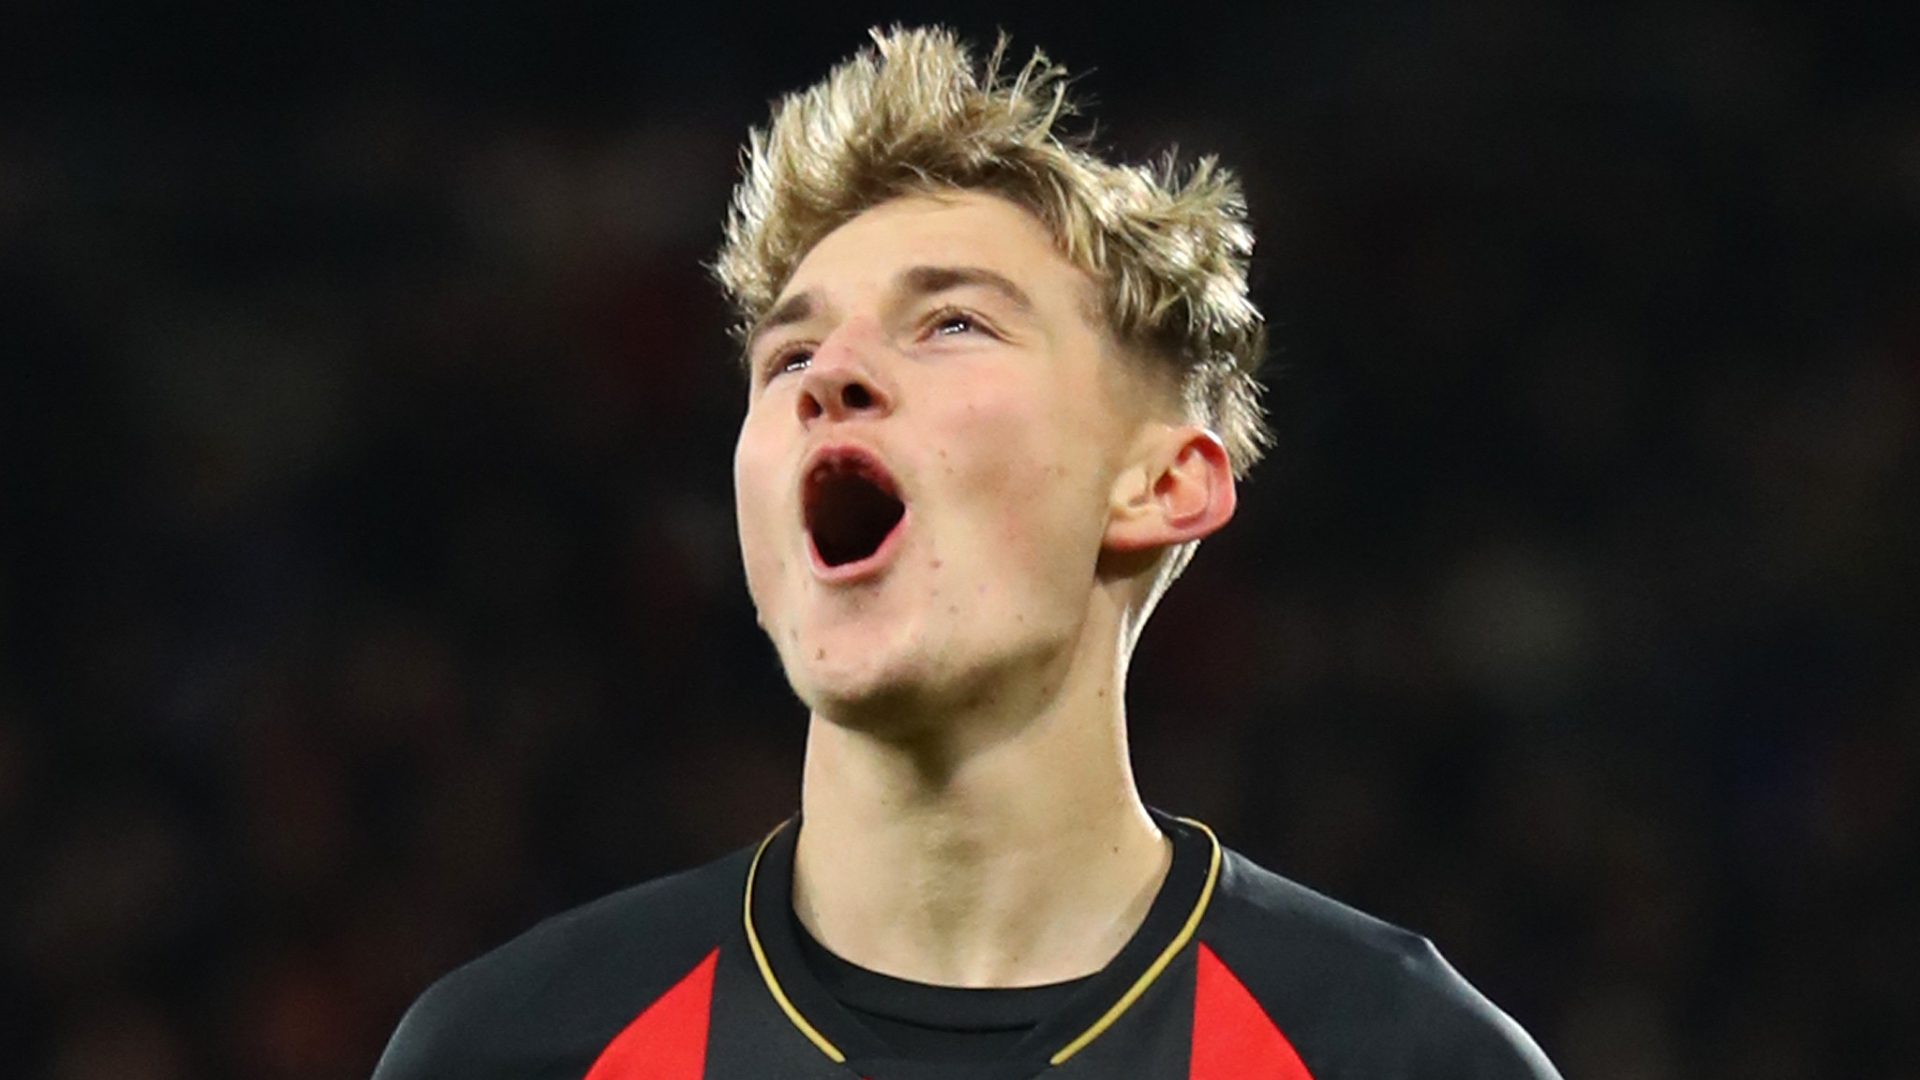 ‘Brooks is like Giggs and could play for Man Utd or Barcelona’ – Blake talks up in-demand Bournemouth star